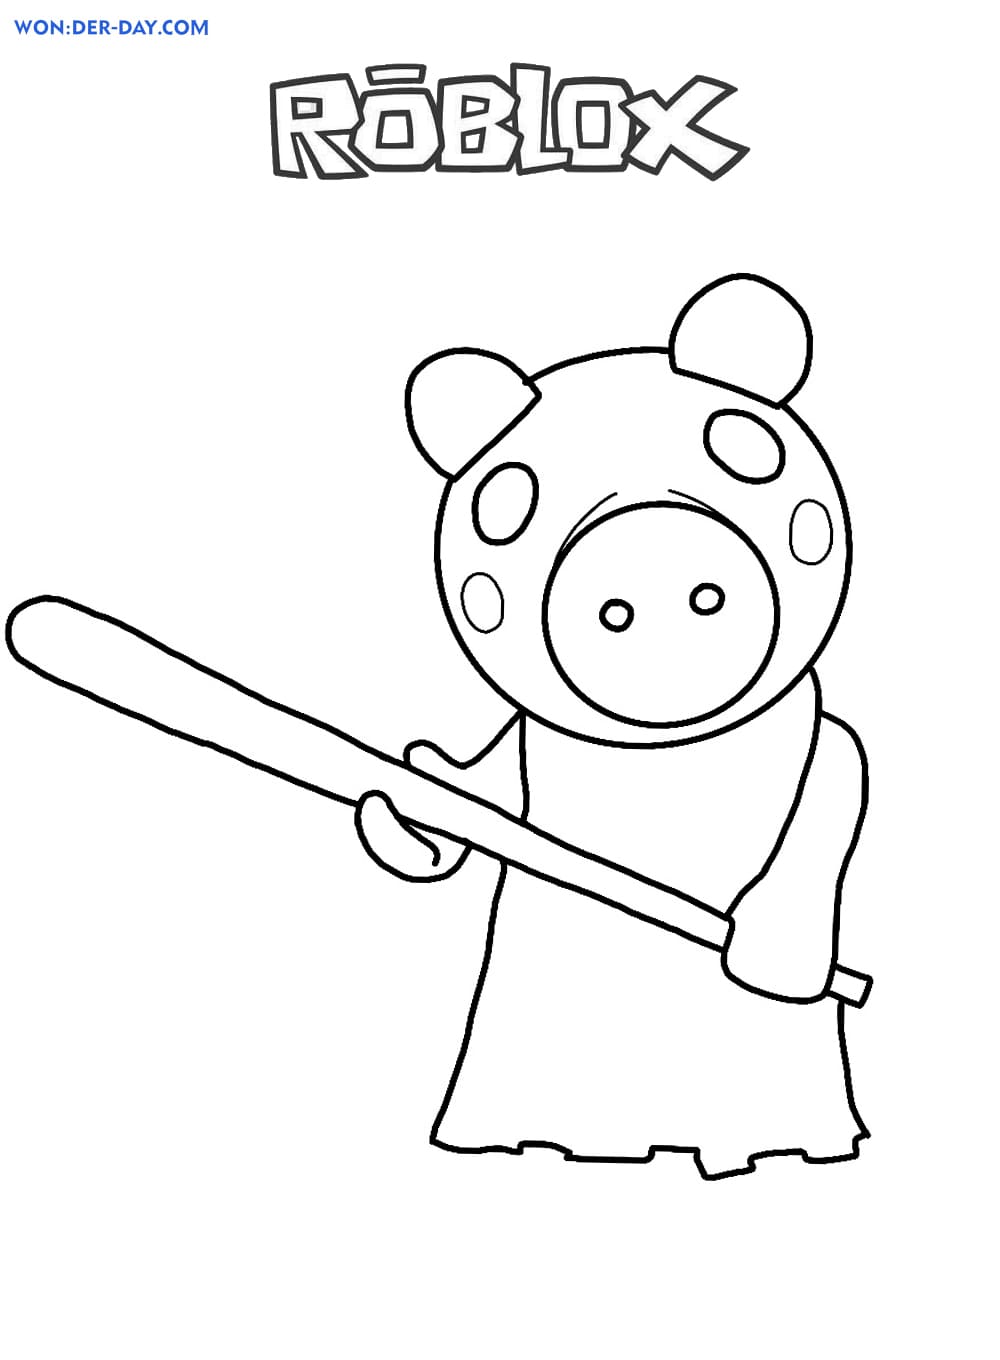 Piggy Roblox Coloring Pages Wonder Day Coloring Pages For Children And Adults - free printable piggy roblox coloring pages